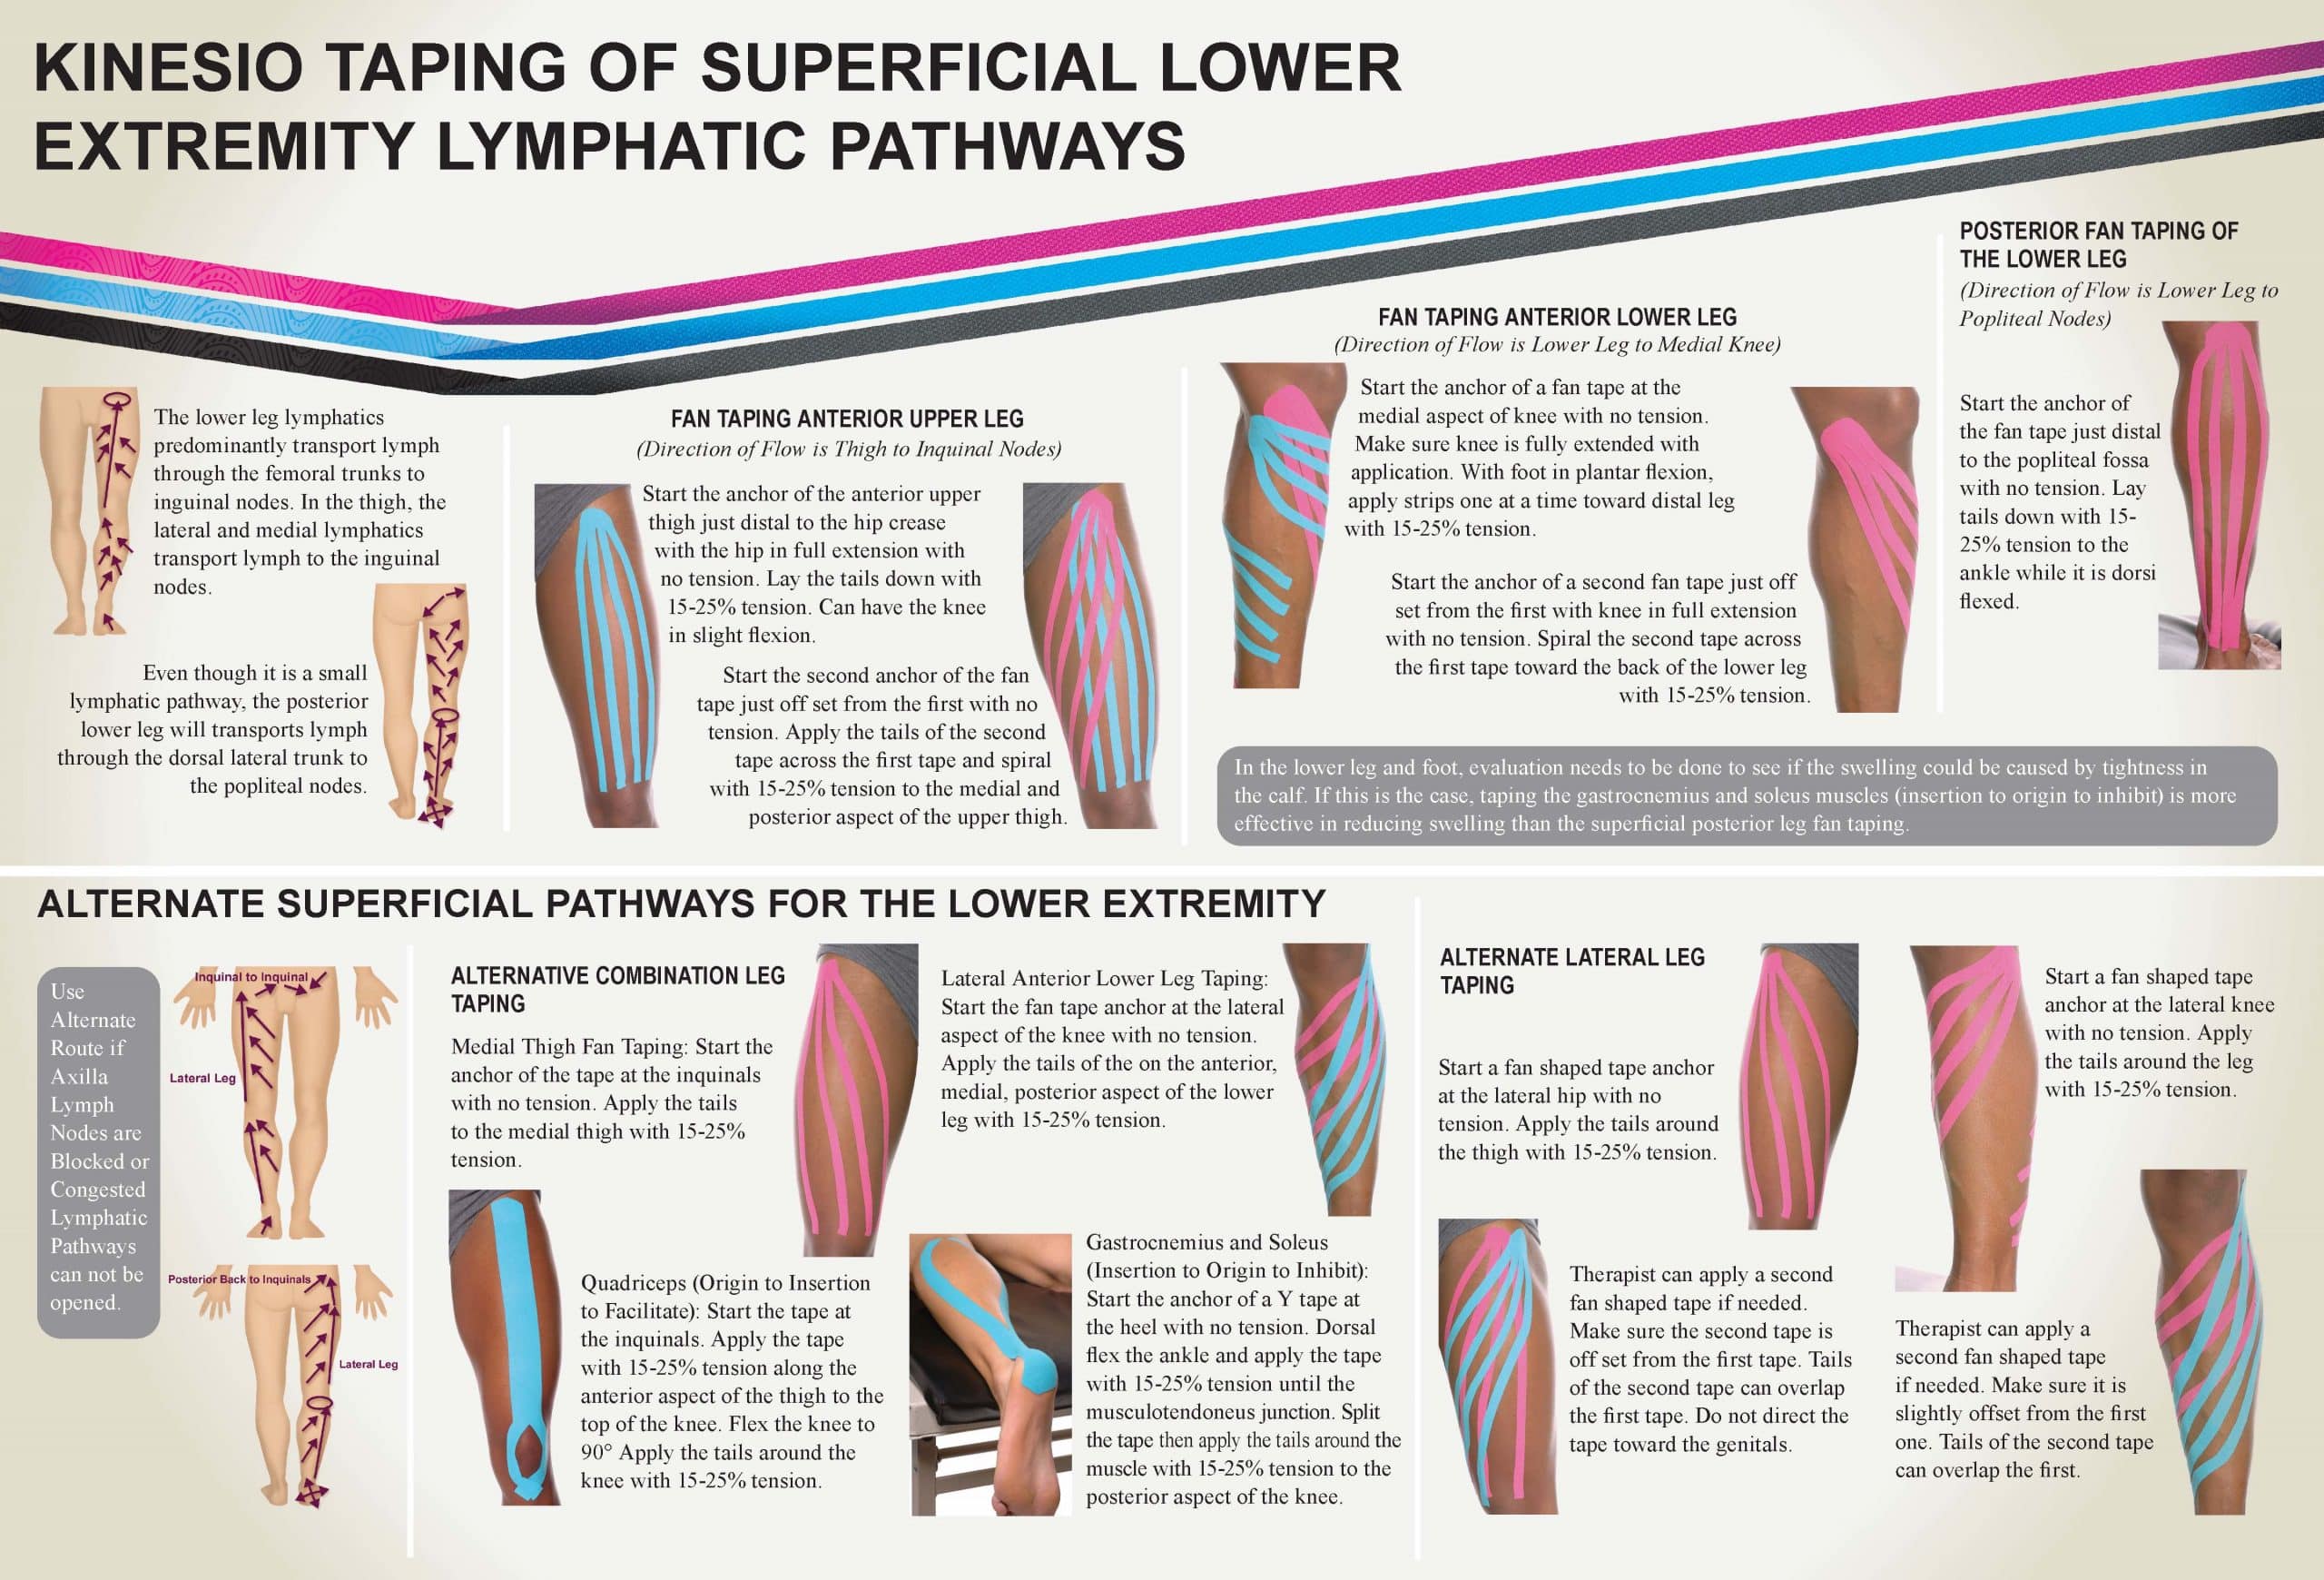 navneord fortvivlelse forbrug Kinesio Taping Of Superficial Lower Extremity Lymphatic Pathways - Kinesio